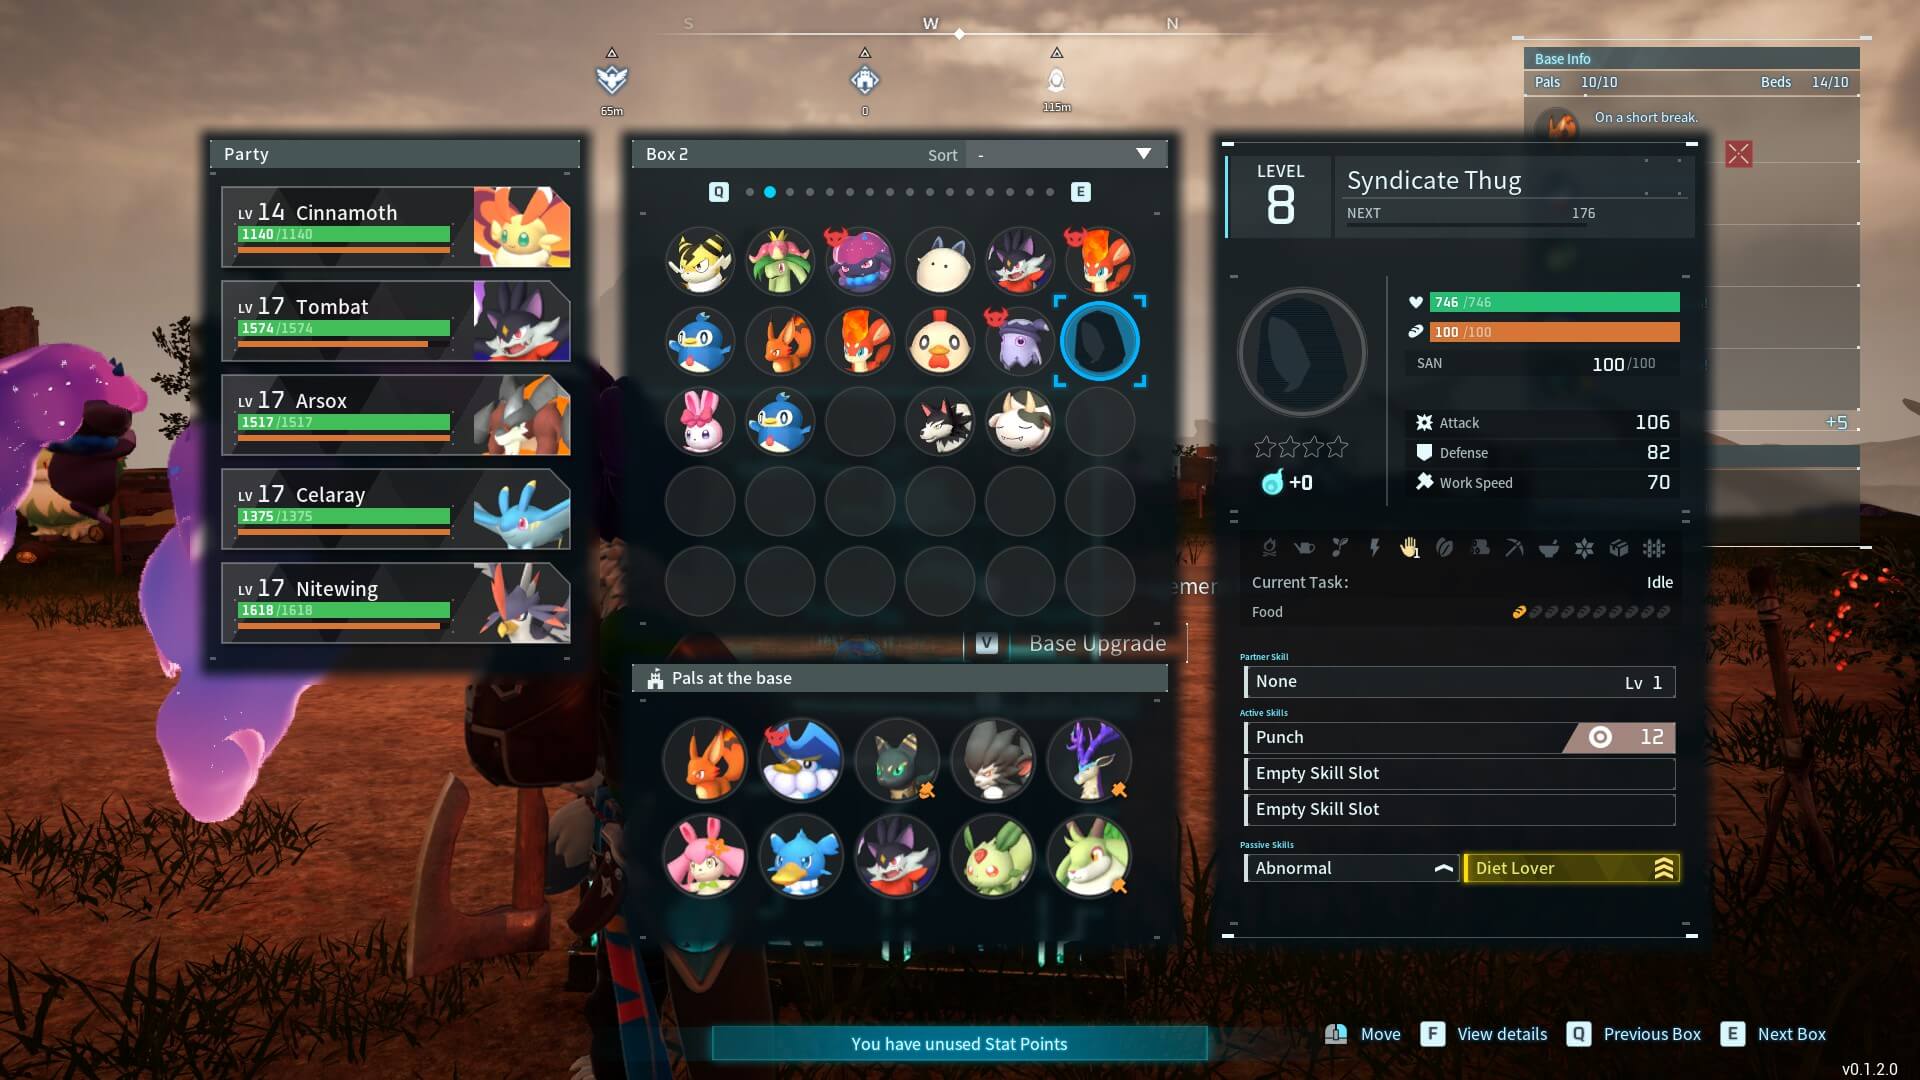 A UI window of multiple creatures with a separate window of a dark figure showing the health and other statistics of the person.